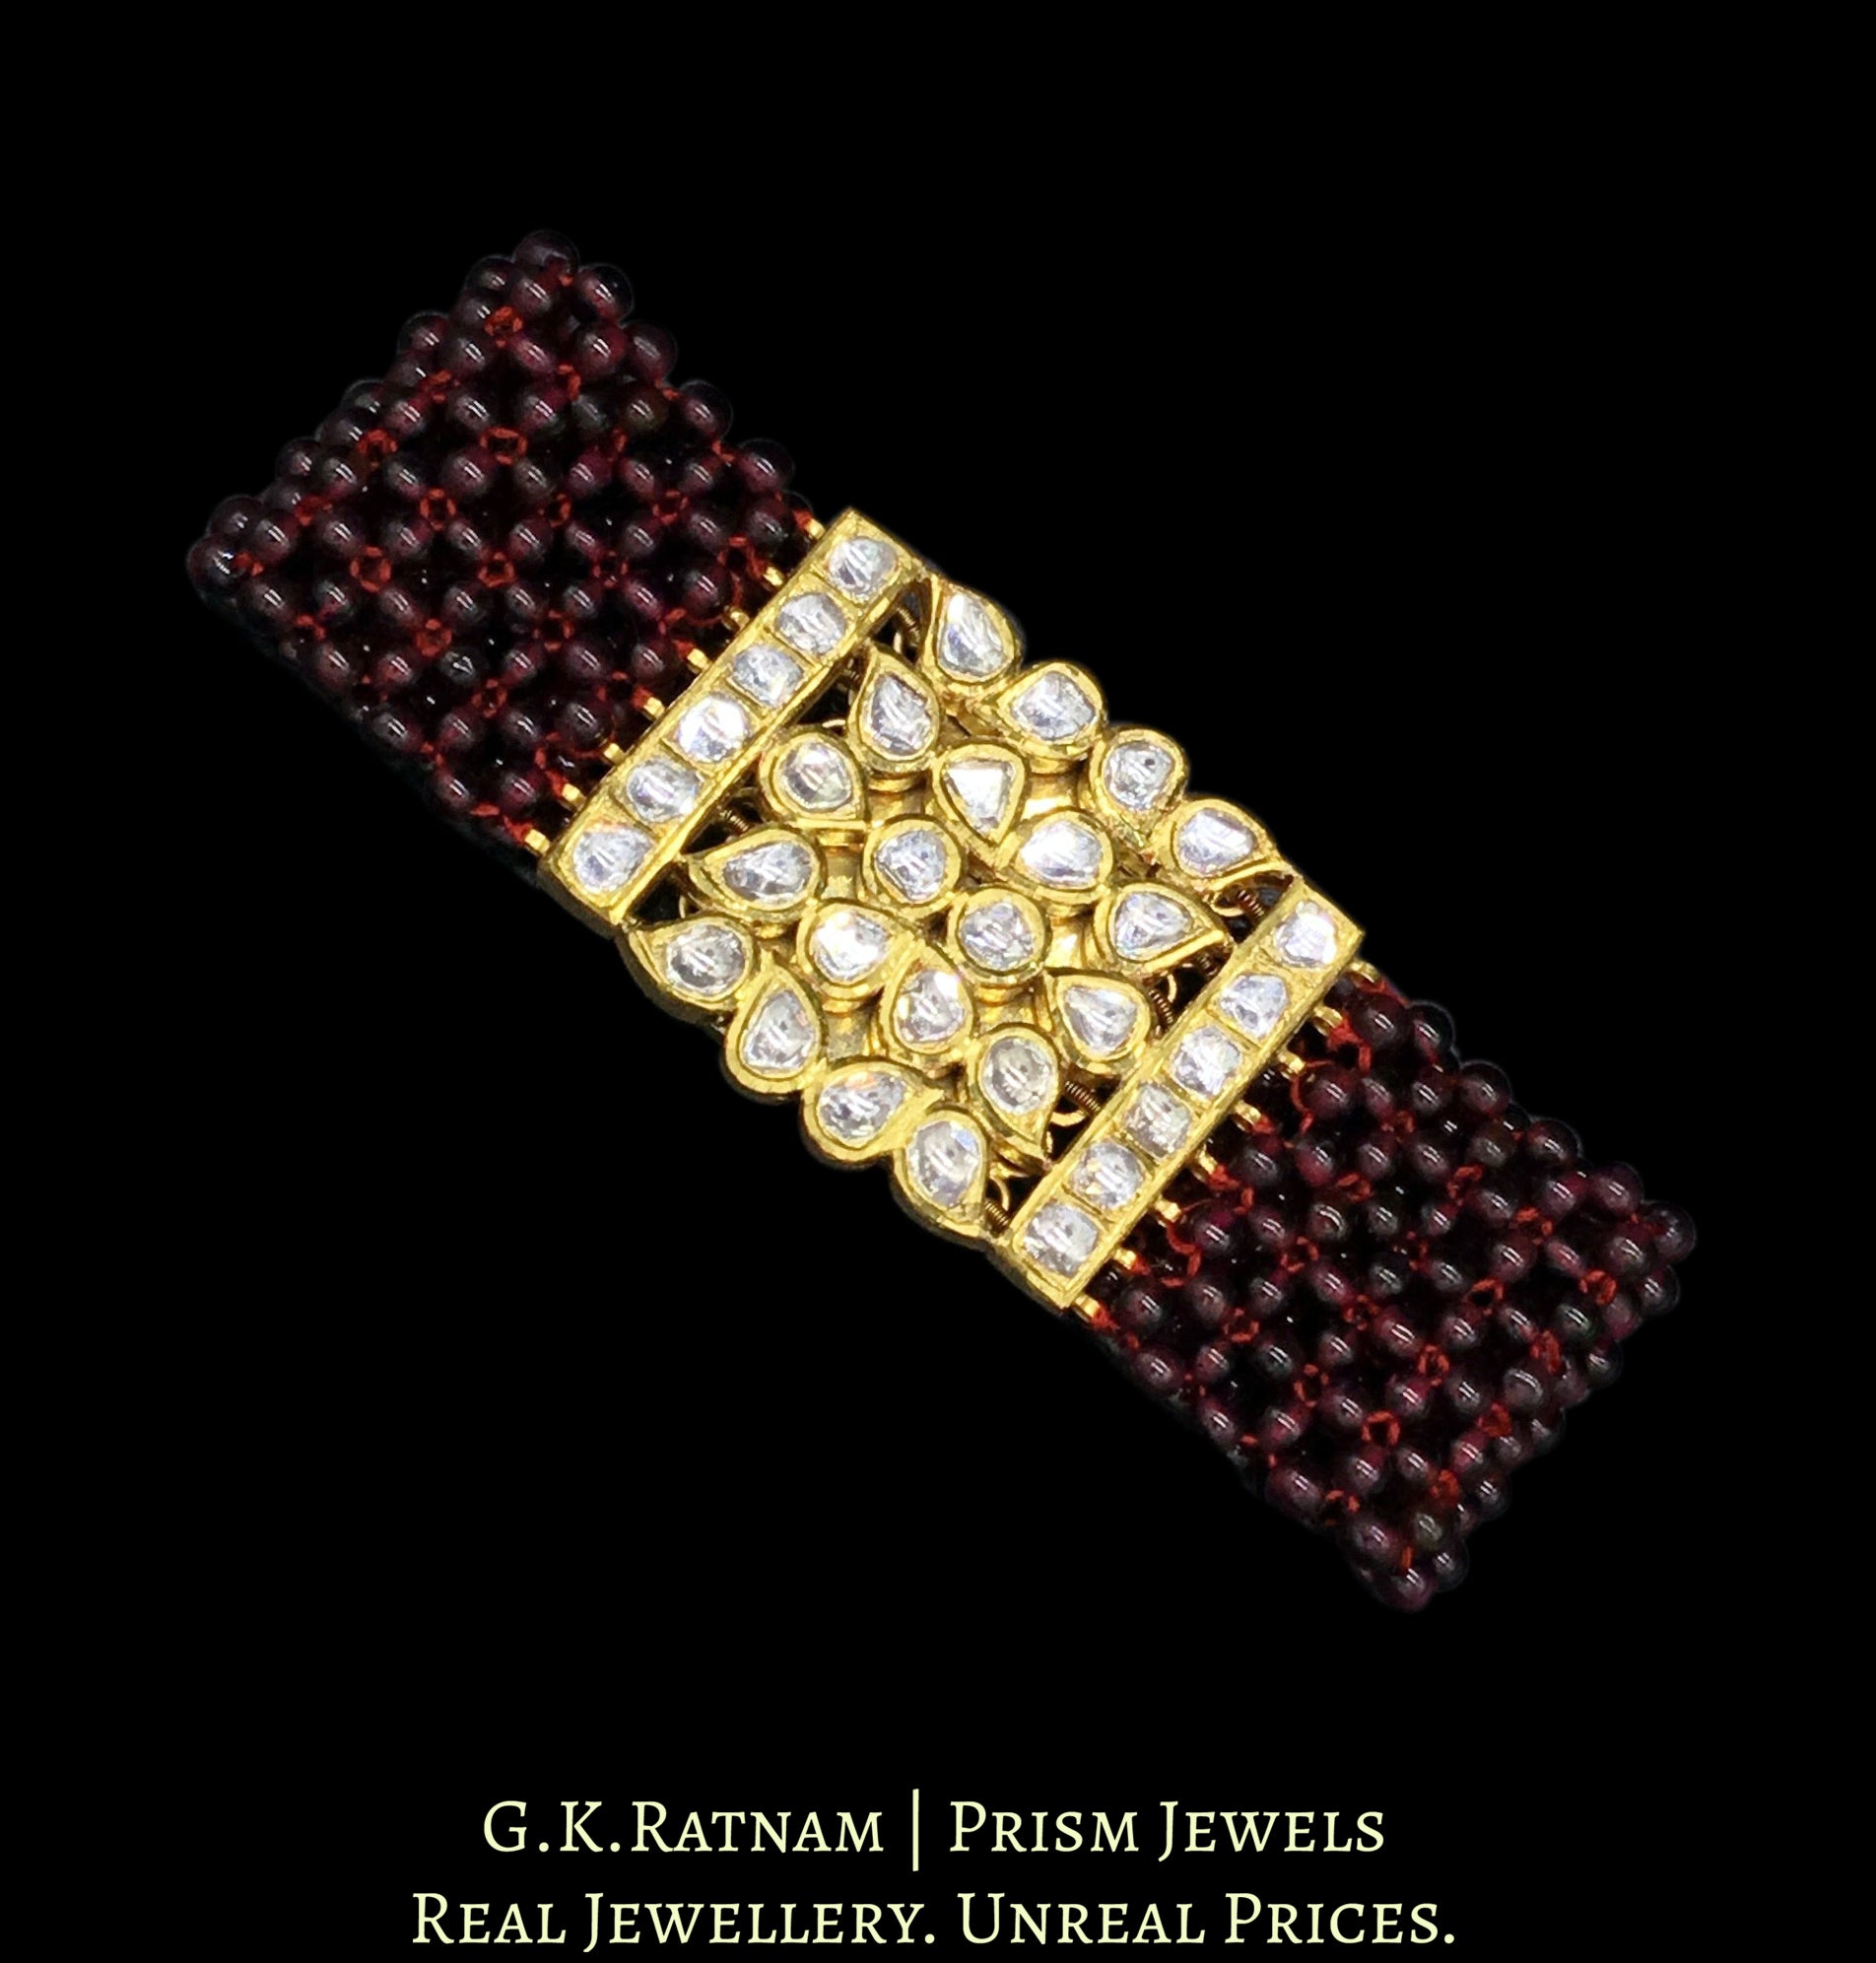 18k Gold and Diamond Polki Bracelet with ruby-red garnets strung like a Mat